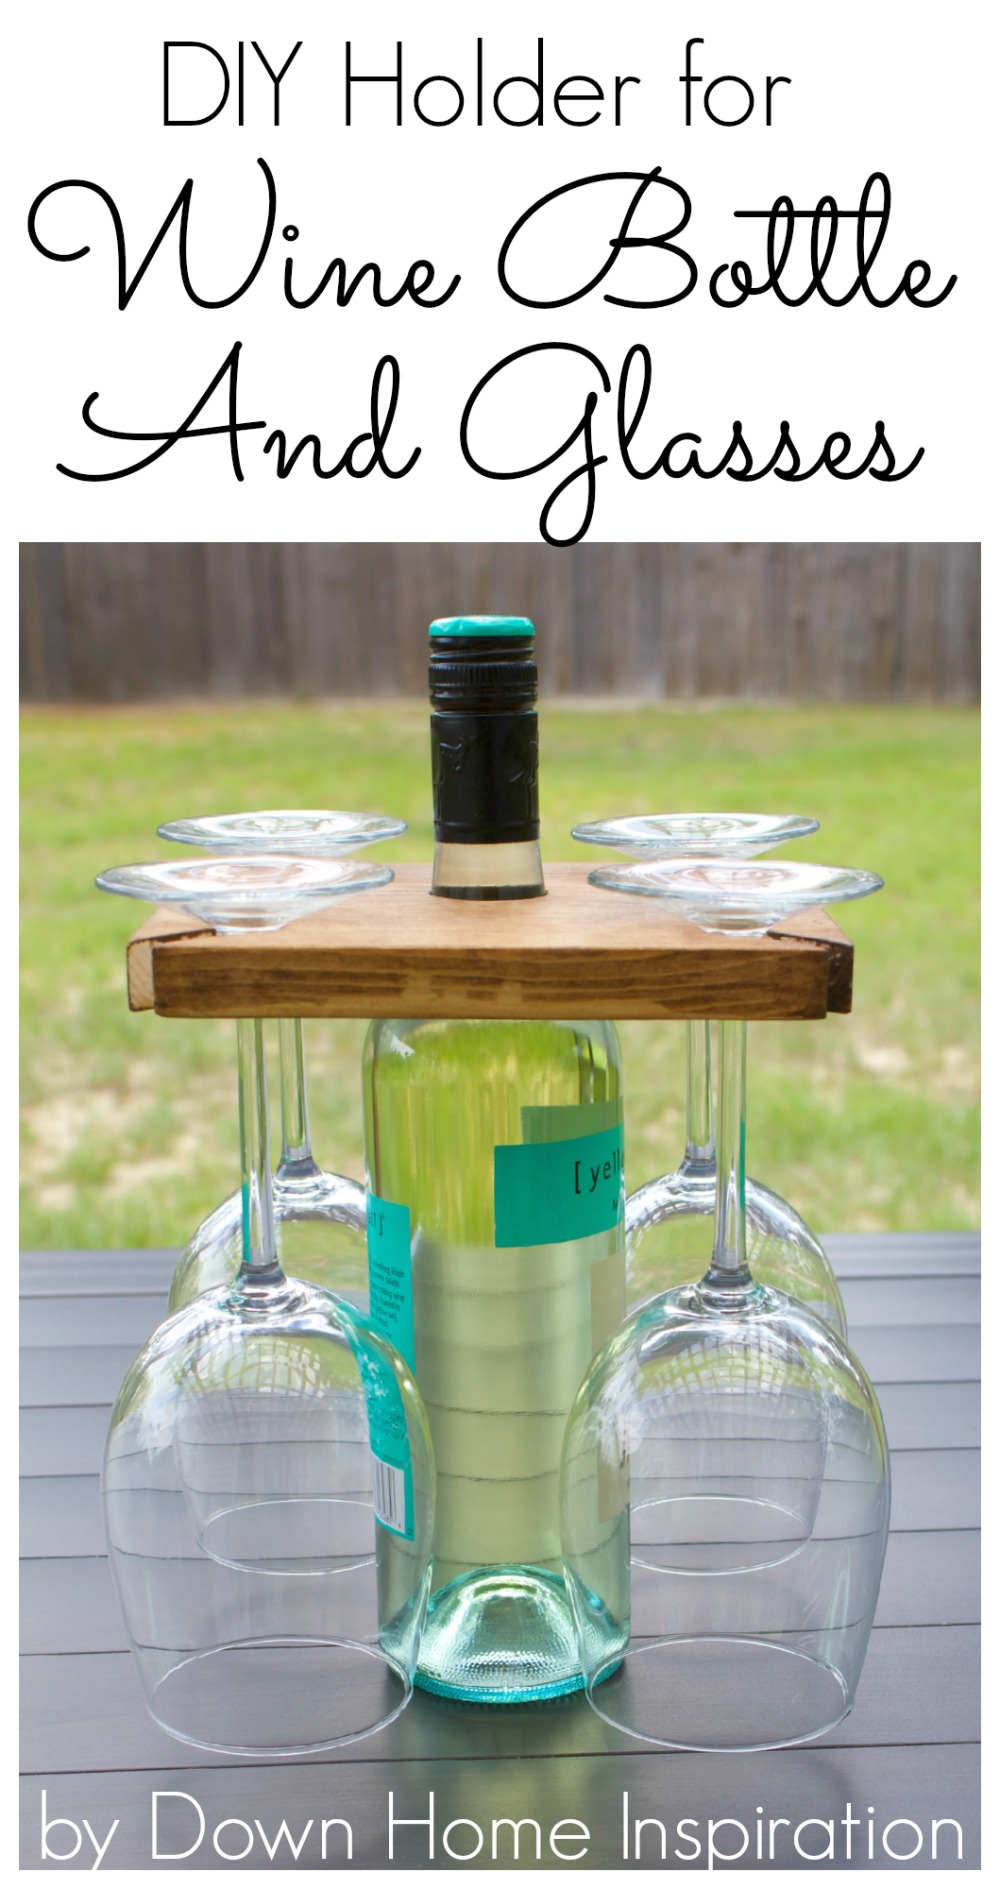 How to Make a DIY Holder for a Wine Bottle and Glasses 